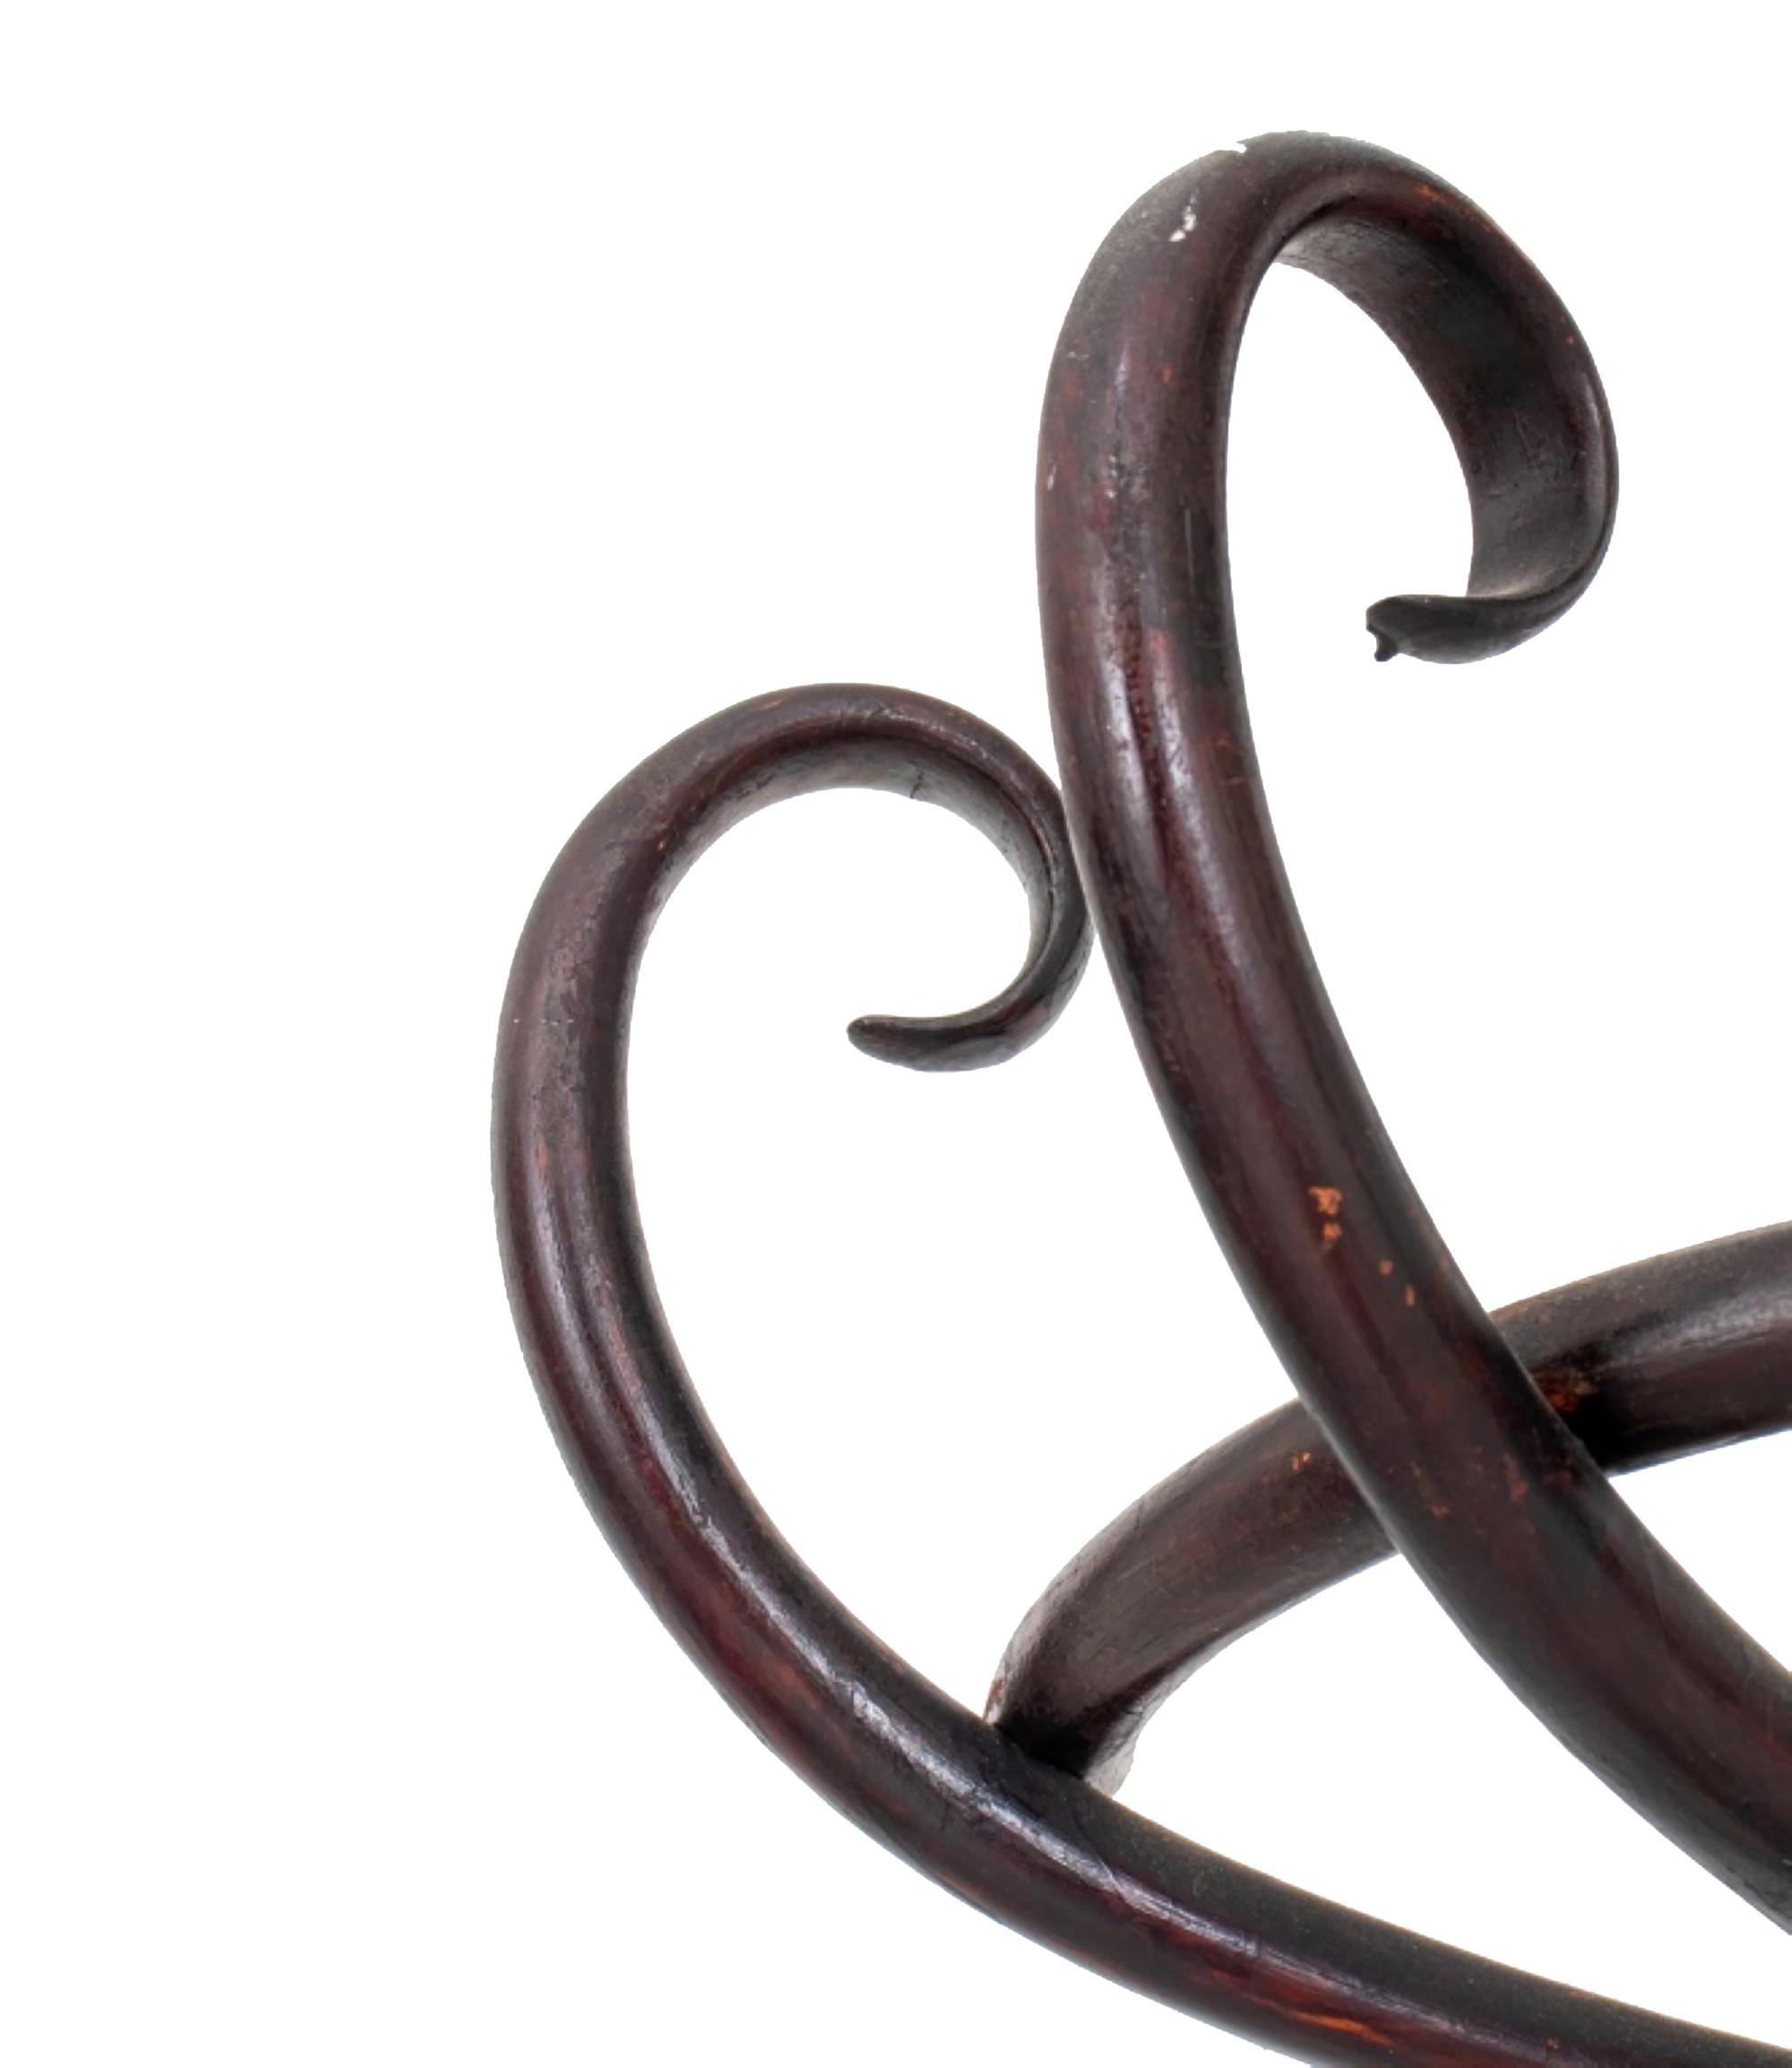 
The Thonet bentwood hall coat rack is approximately 80 inches in height, 29 inches in width, and 18 inches in depth.




